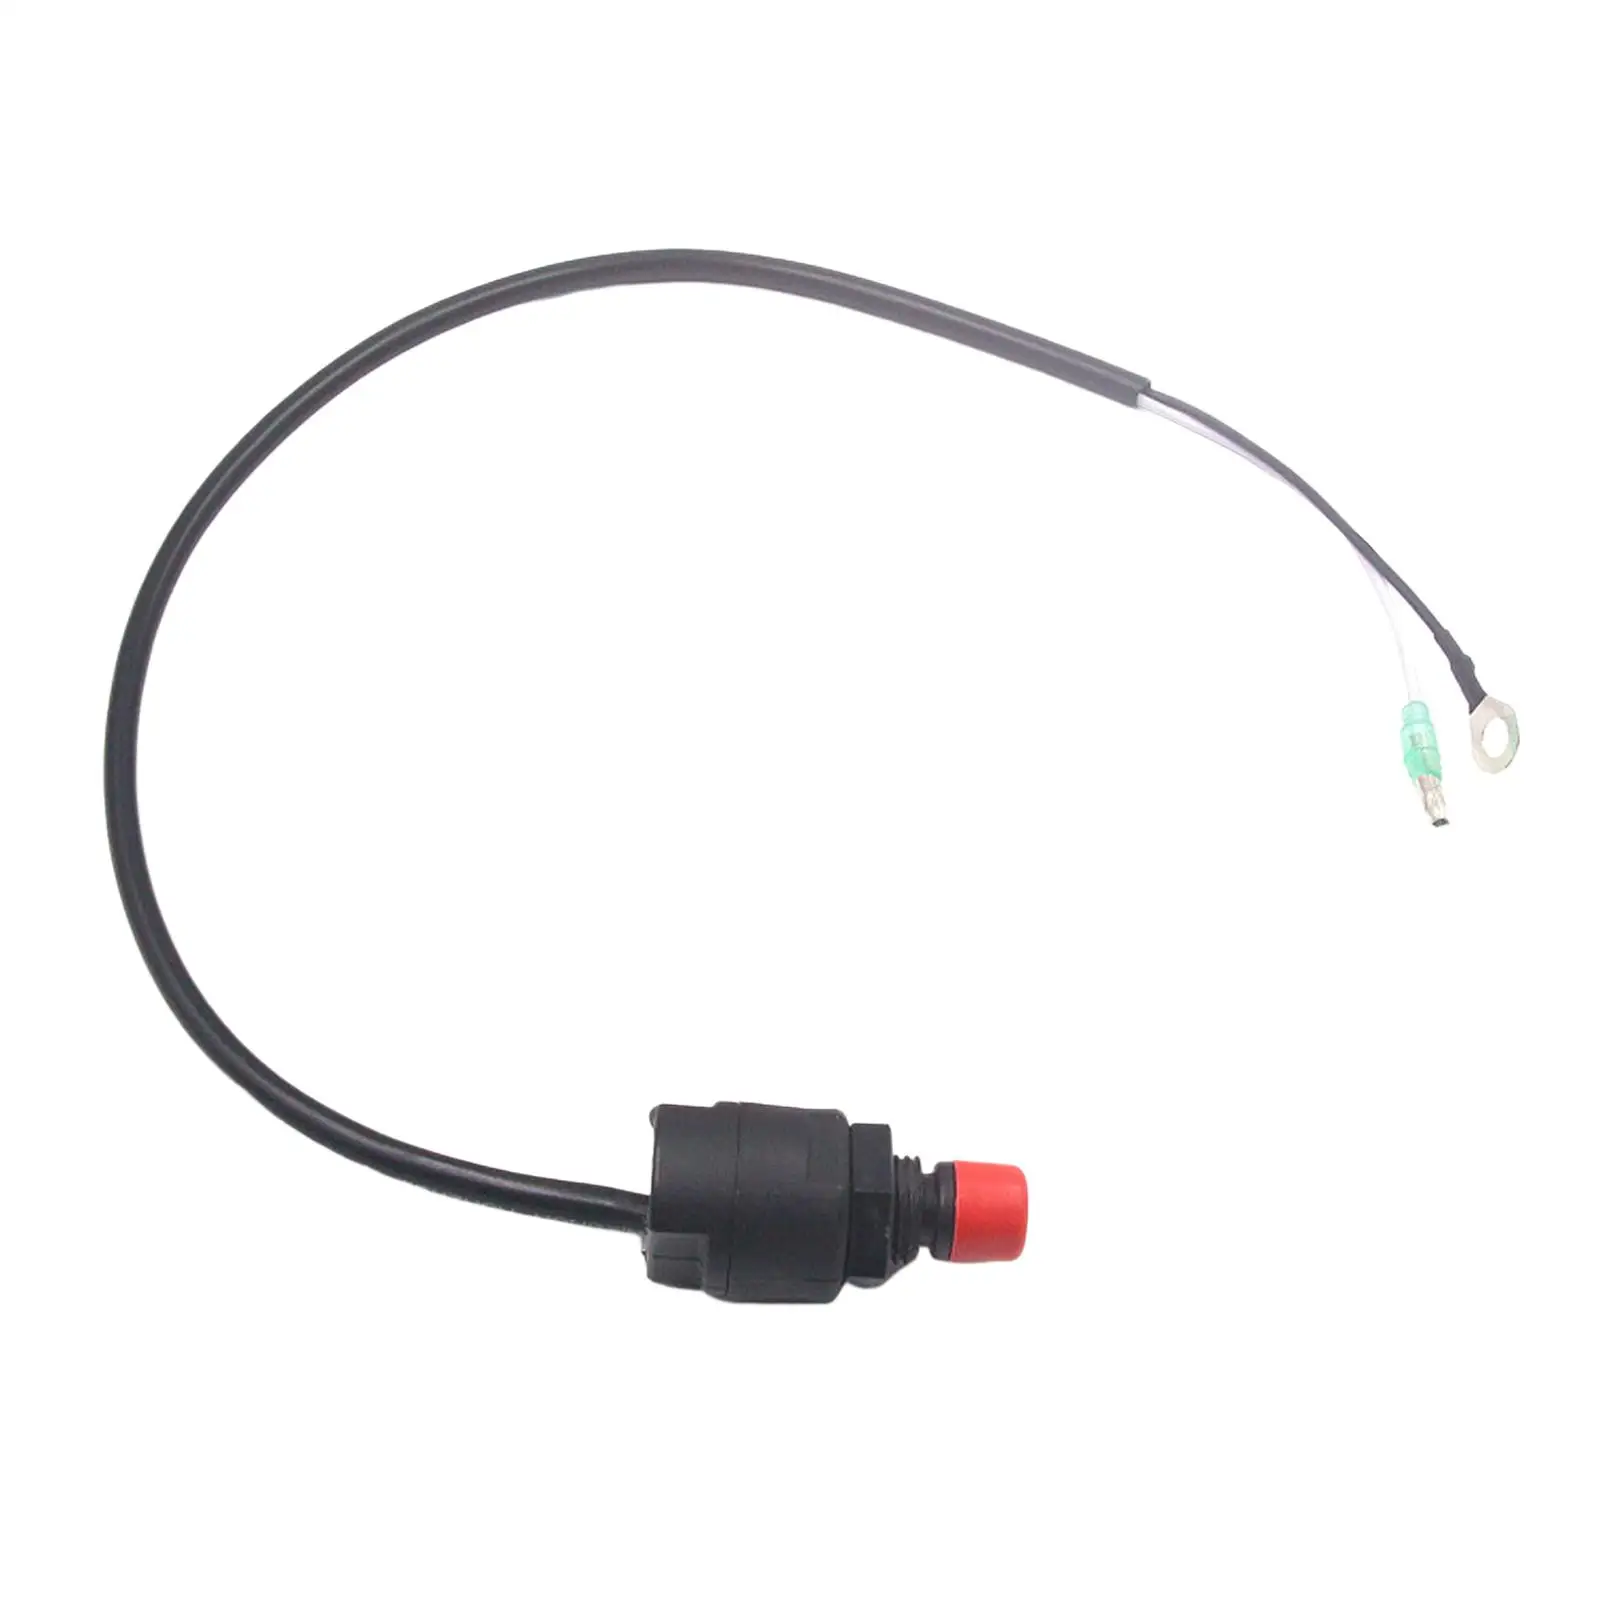 Durable Boat Outboard Kill Stop Switch Engine Motor Emergency Kill Stop Switch for Boat Dirt Bike Accessories Parts